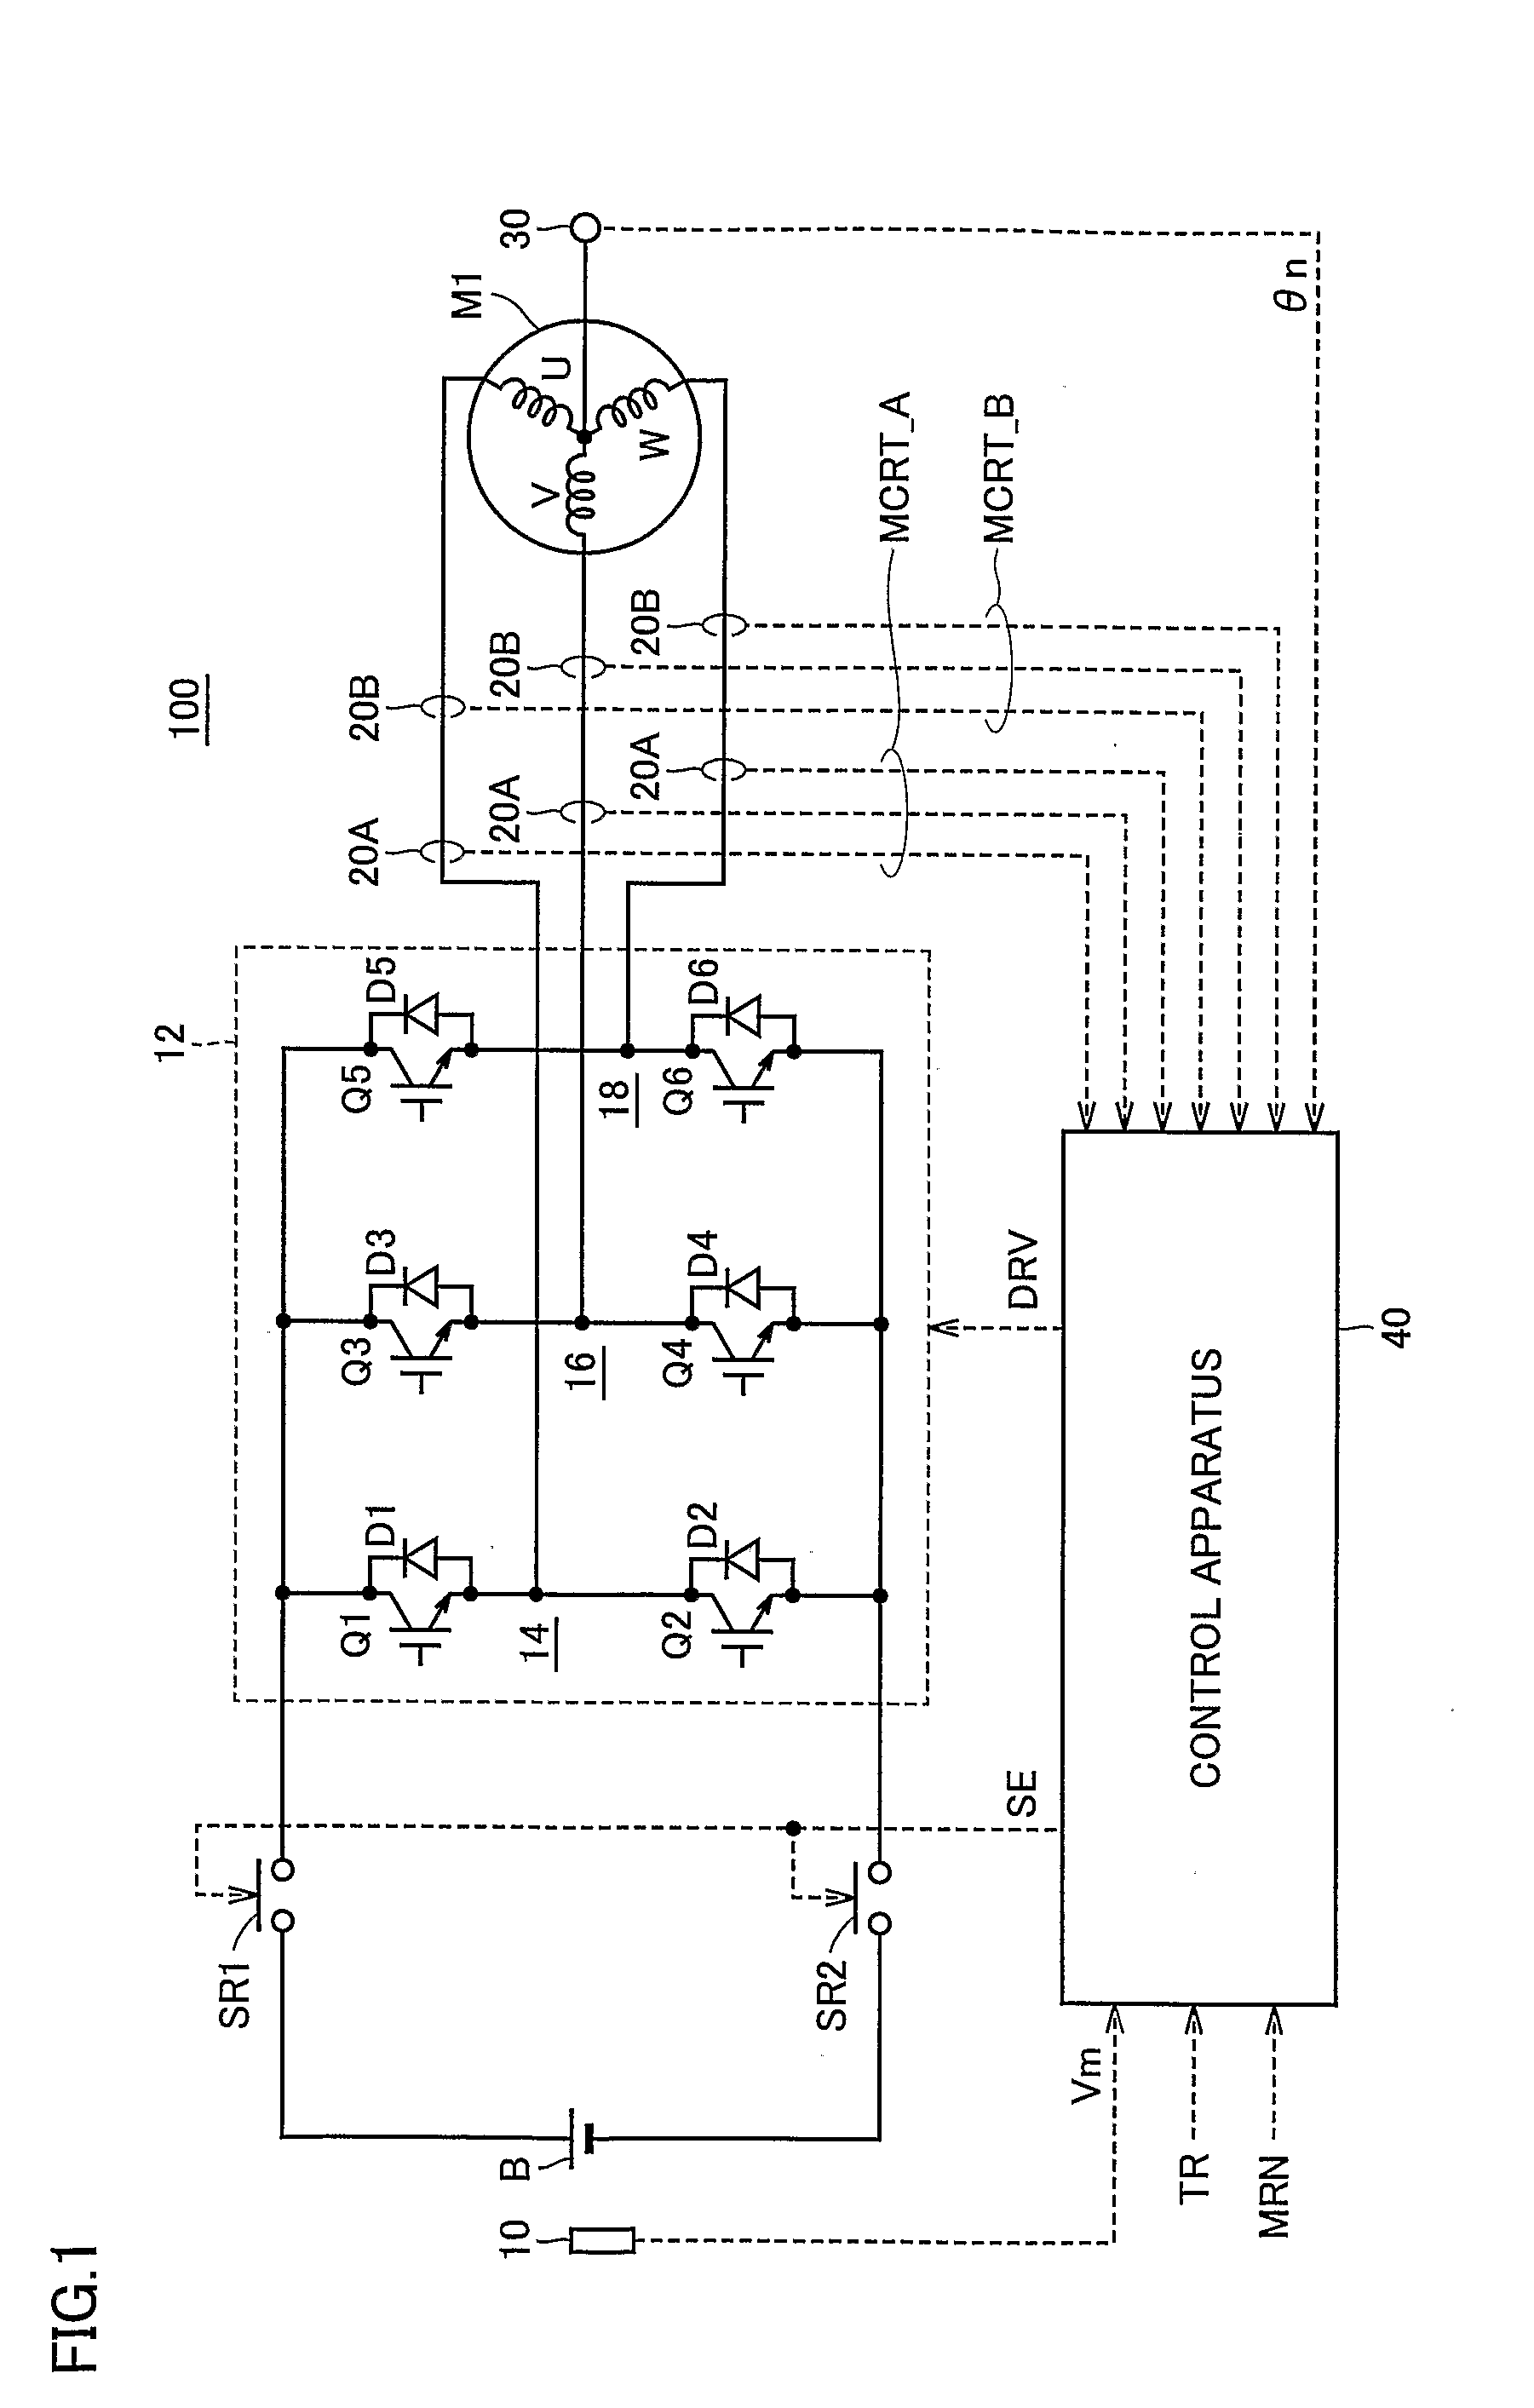 Power Supply Apparatus With Function of Detecting Abnormality of Current Sensor